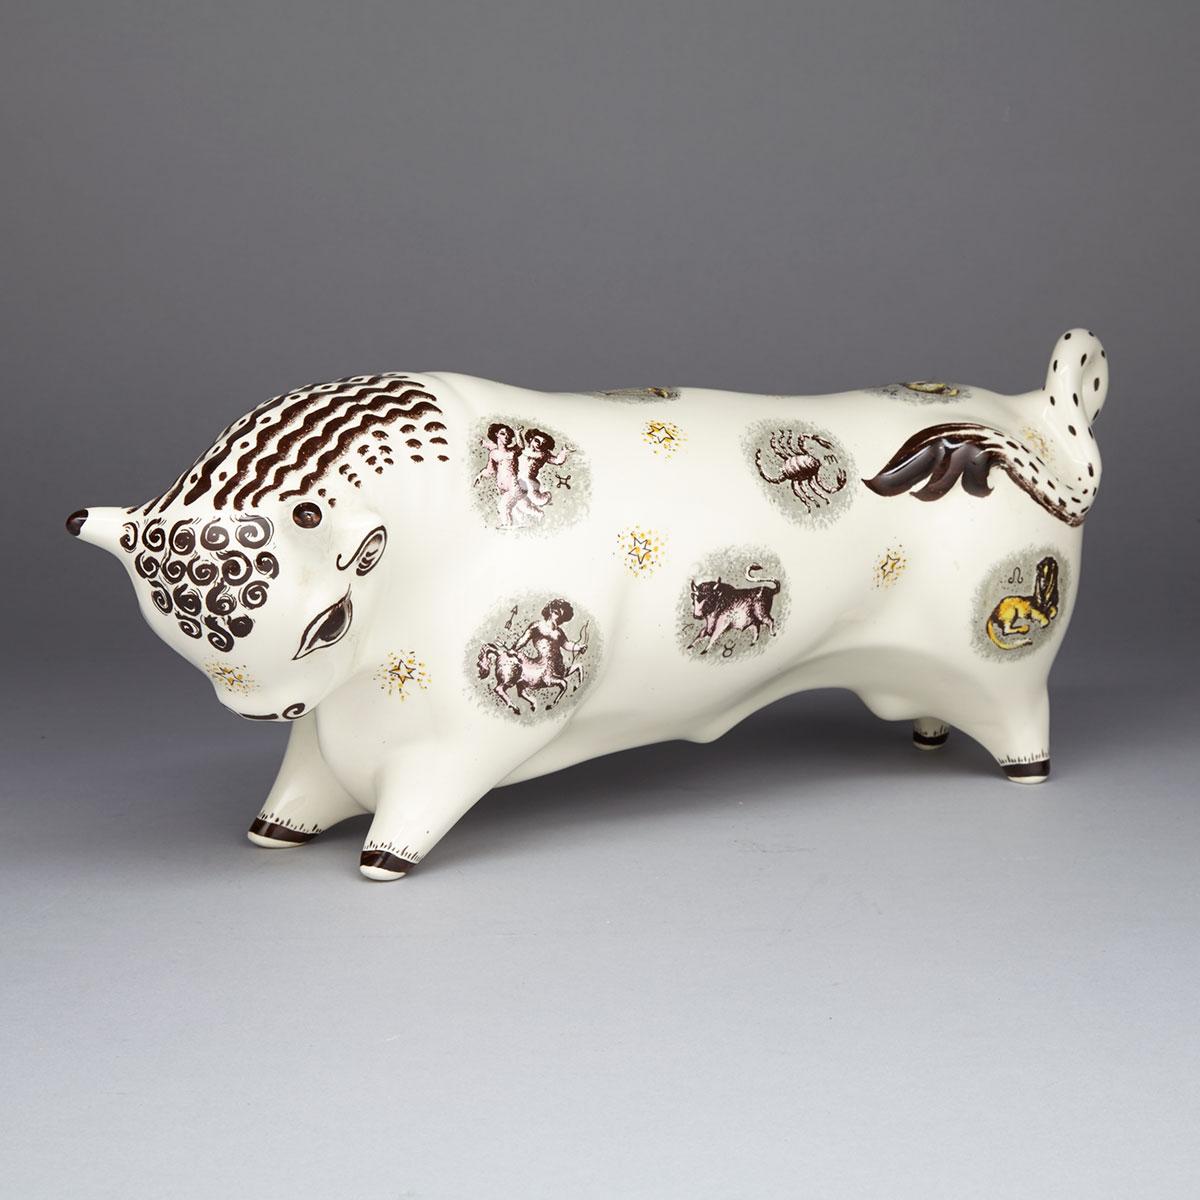 Wedgwood Queens Ware ‘Taurus the Bull’, Arnold Machin and Eric Ravilious, mid-20th century